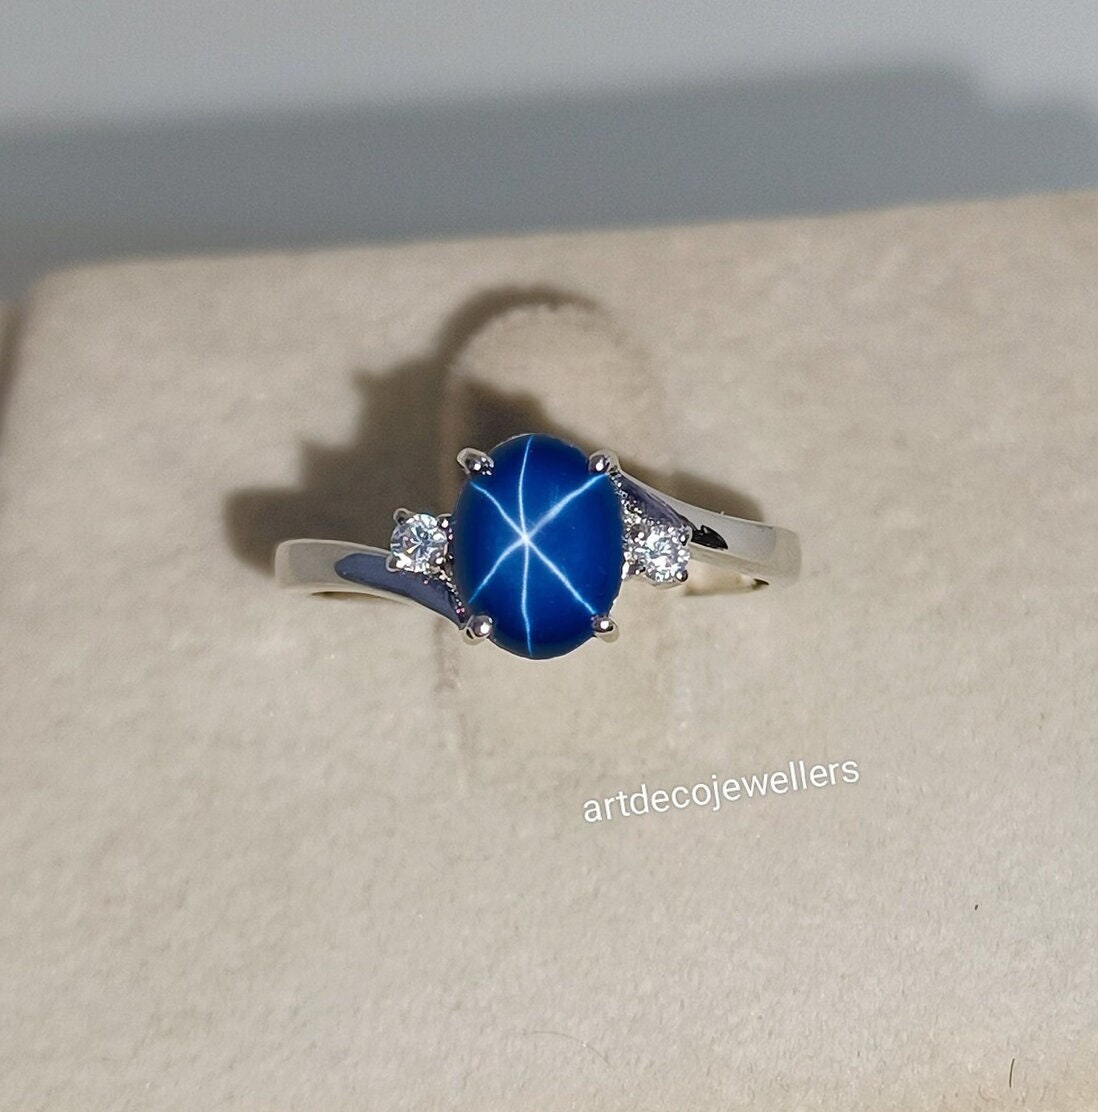 Blue Star Sapphire Cabochon Ring 46.90 ct with Diamonds in Platinum -  HM2533AN - NK Industries LTD